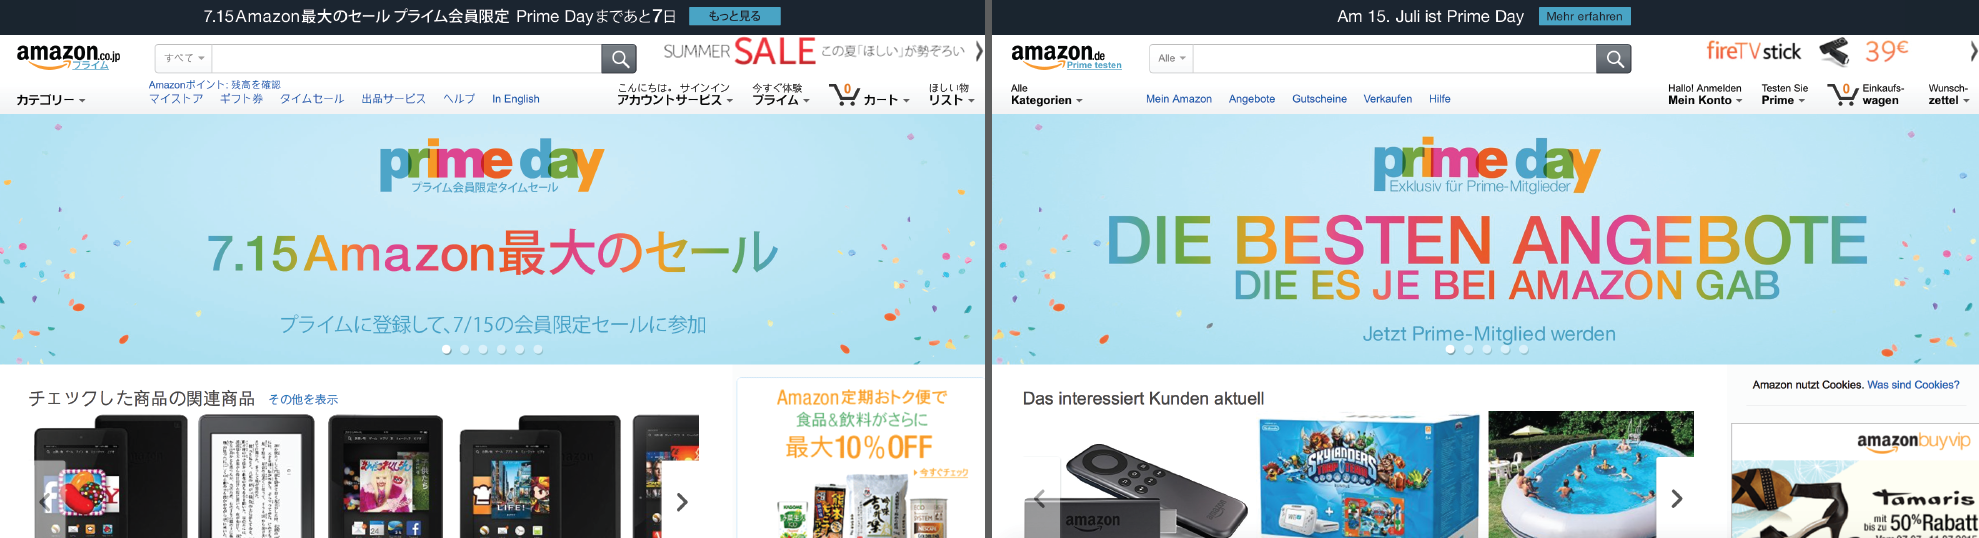 Amazon's homepage in Japanese and German